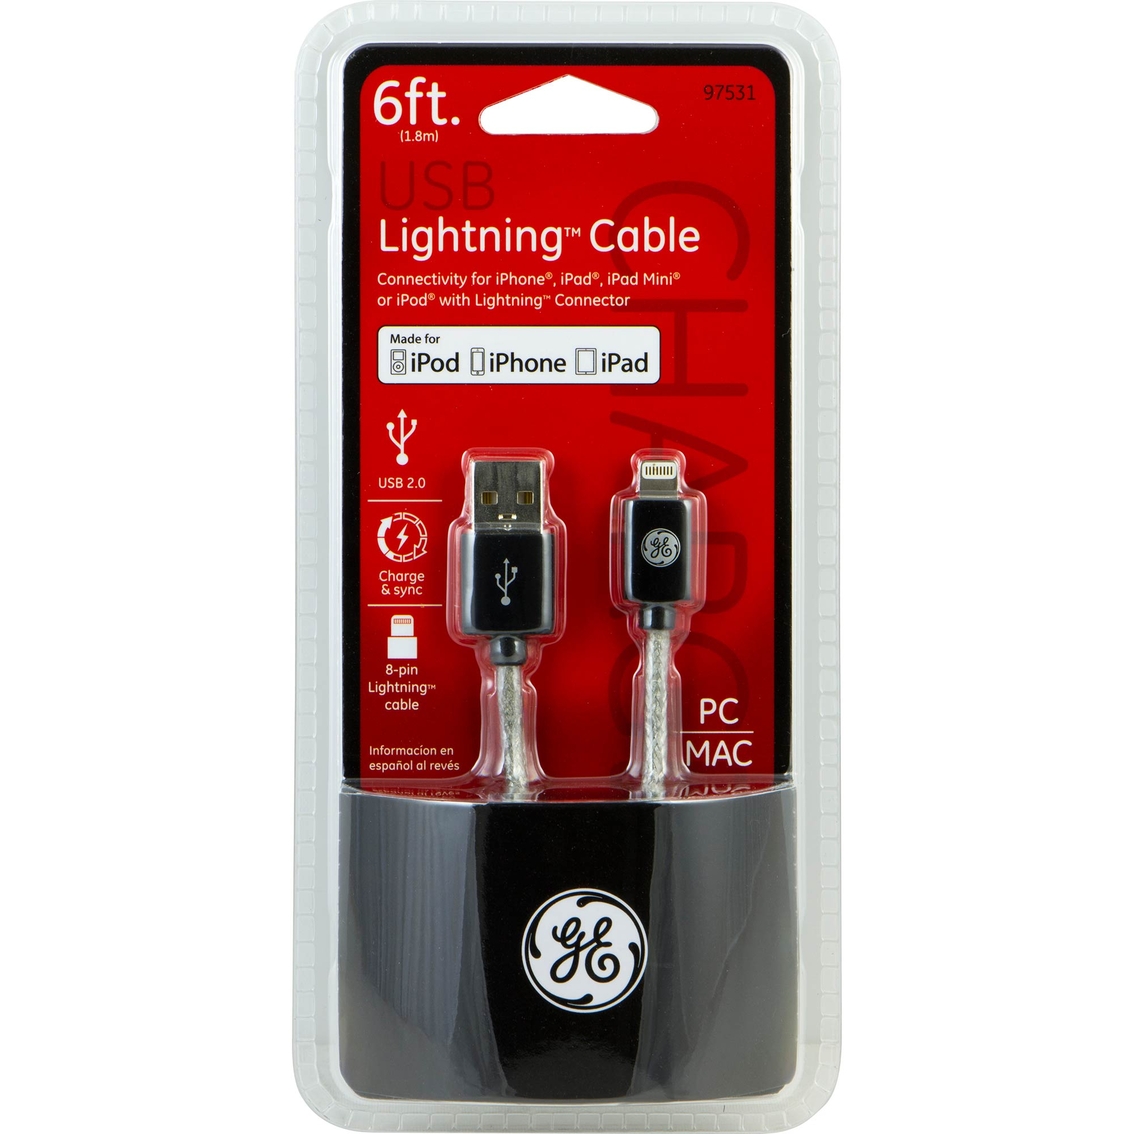 GE Lightning to USB Cable 6 ft. - Image 2 of 2